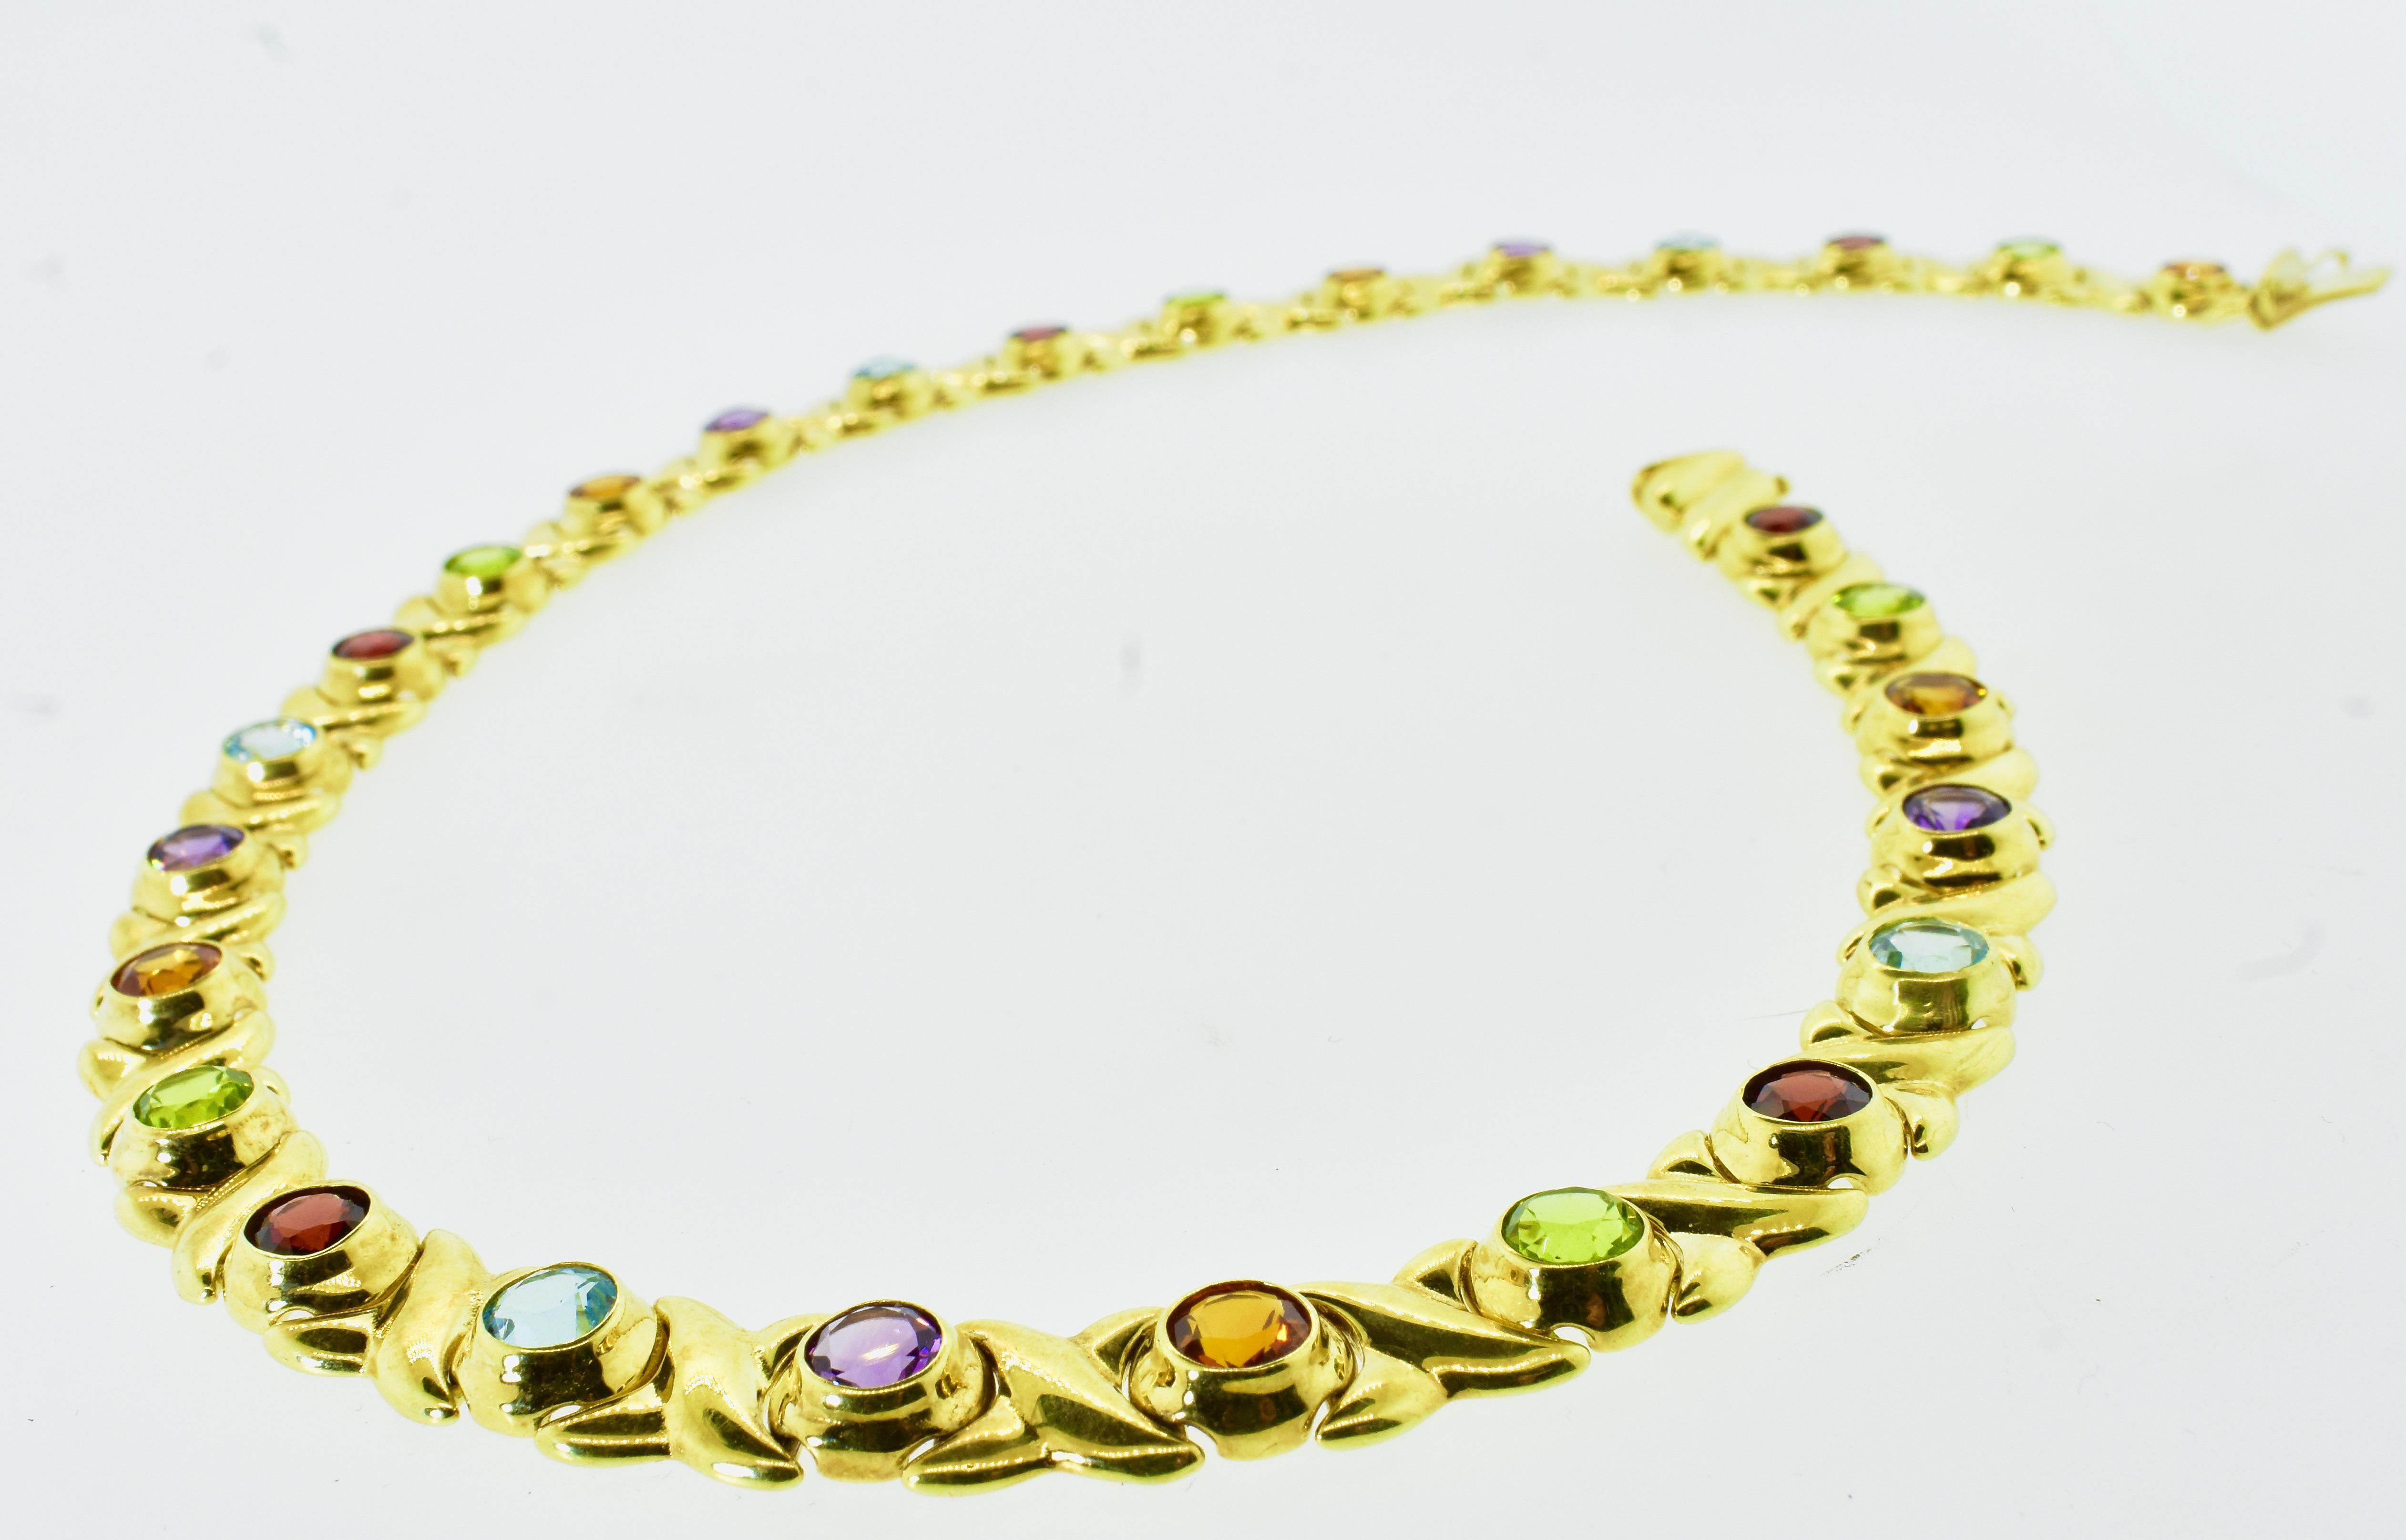 Gem Set Yellow Gold Vintage Necklace with Peridot, Amethyst, Citrine, and Garnet For Sale 5